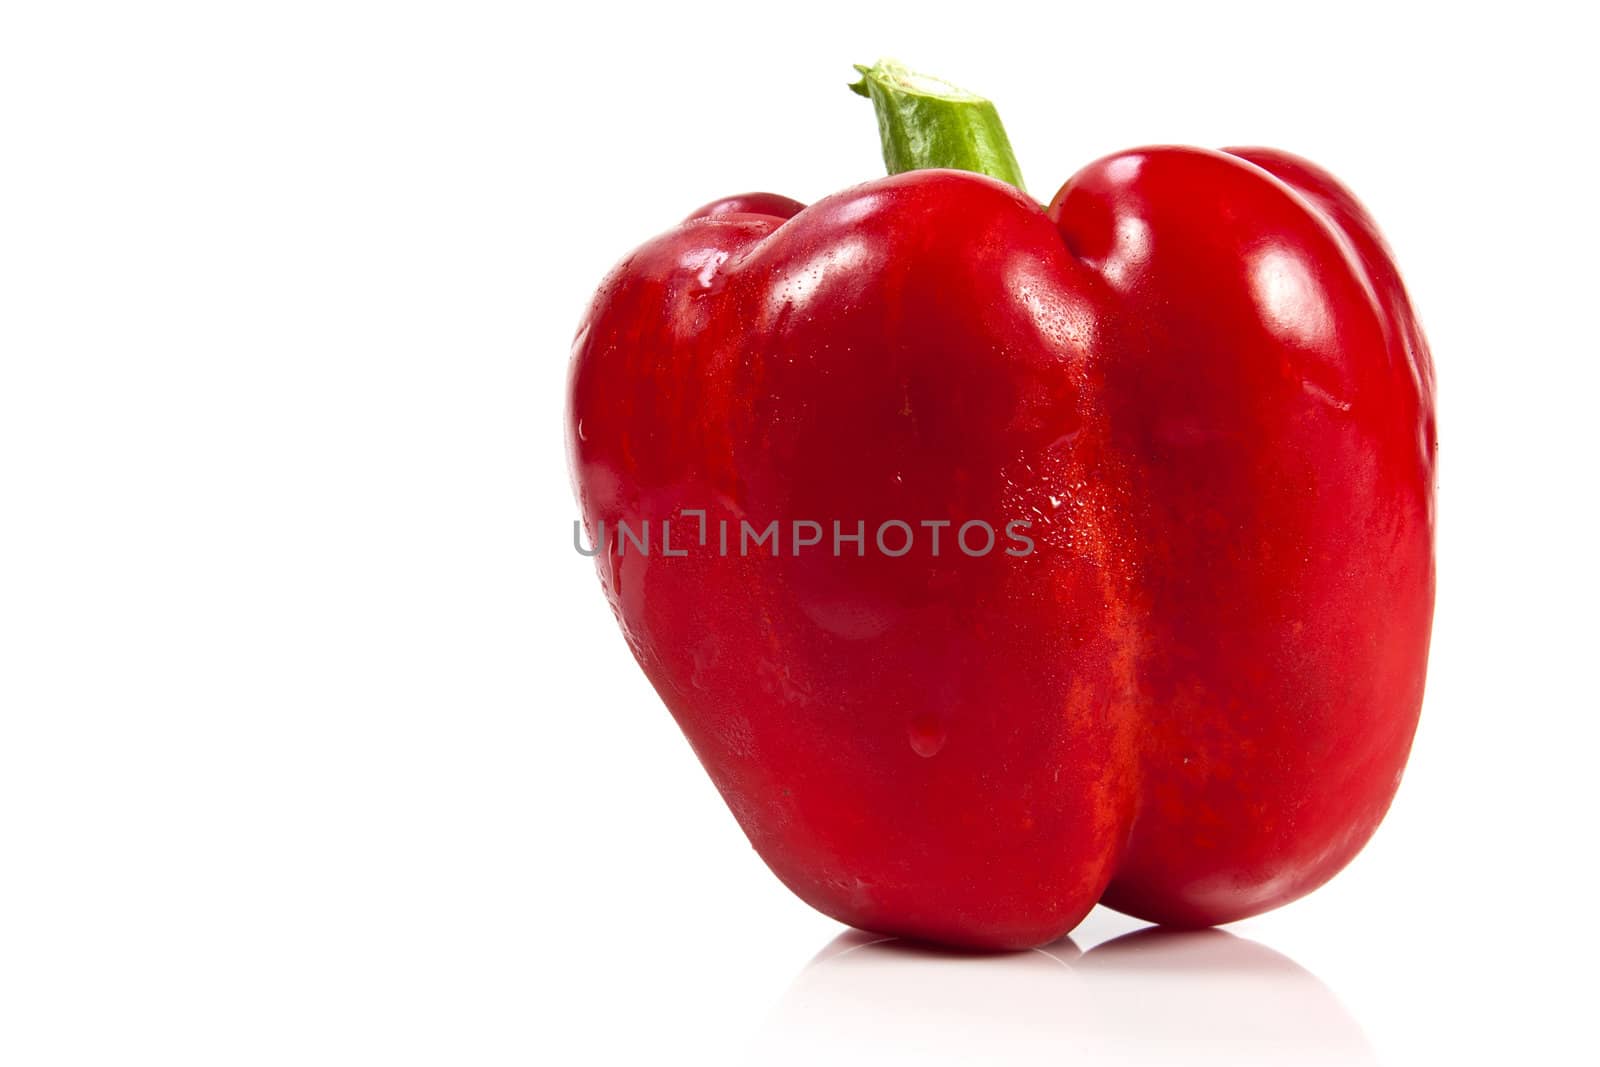 Red bell pepper on white background with blank text copy space